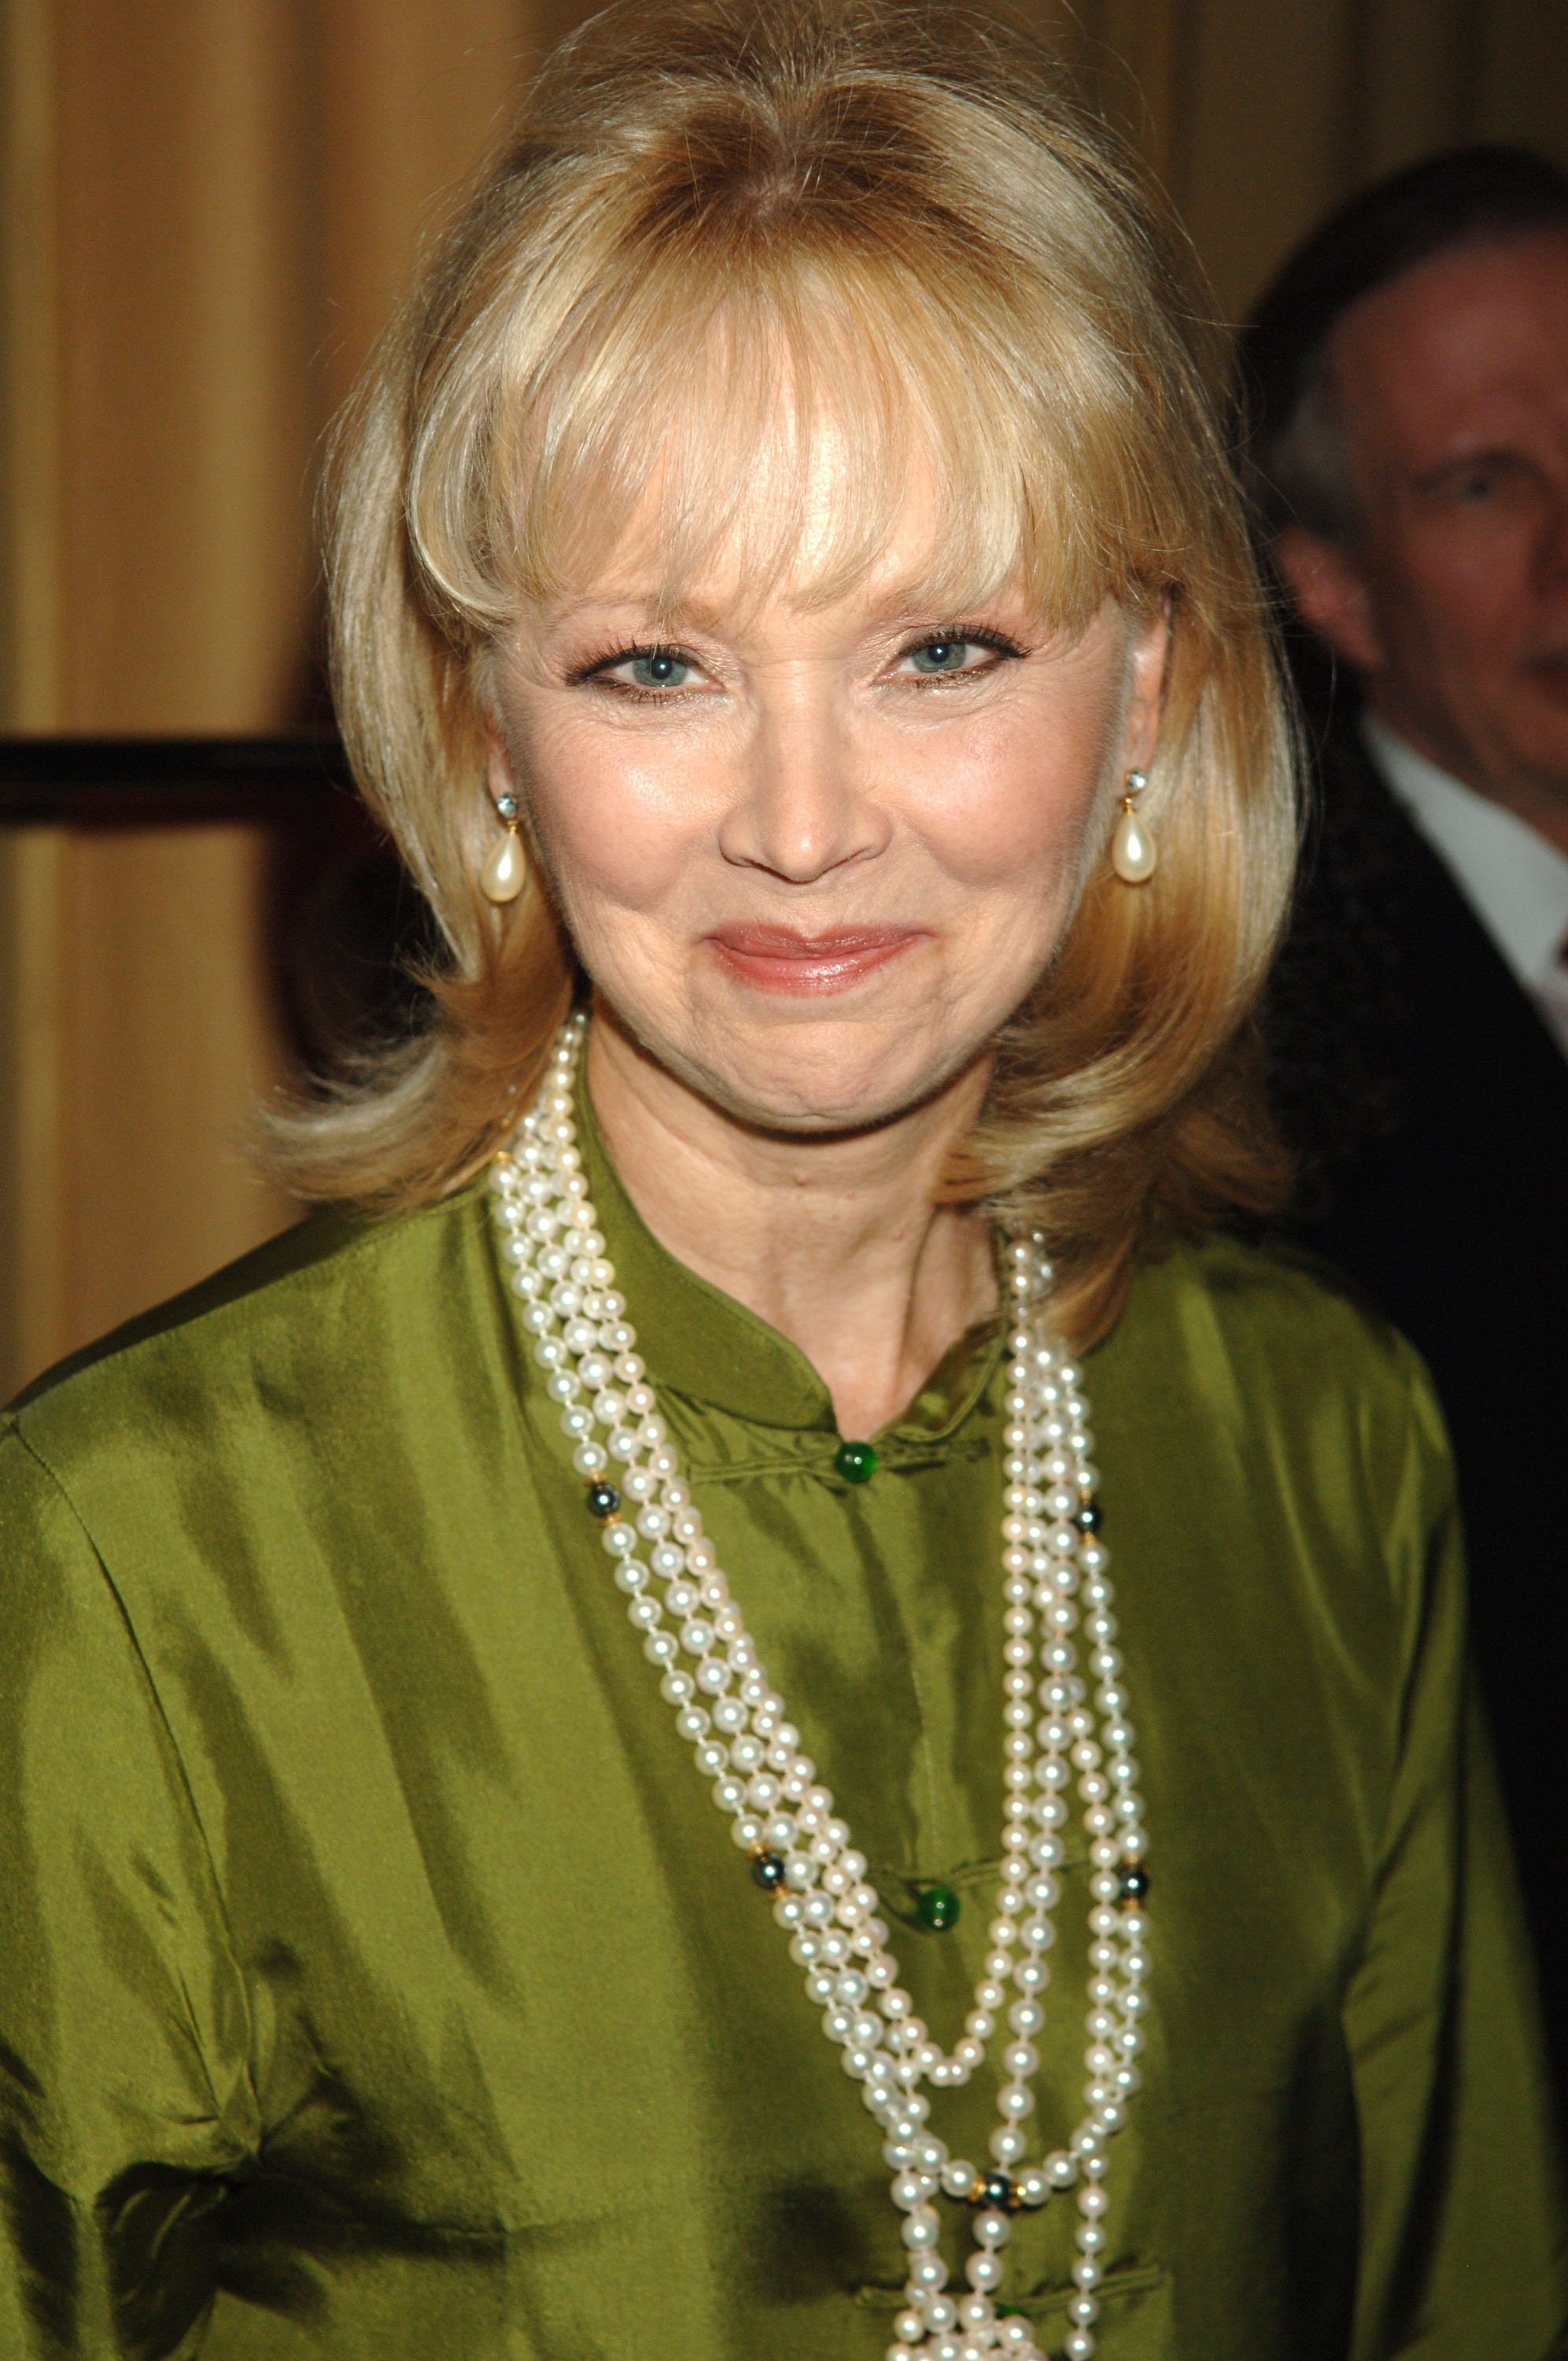 Shelley Long at the TV Land Awards in Santa Monica, California in 2006. | Source: Getty Images